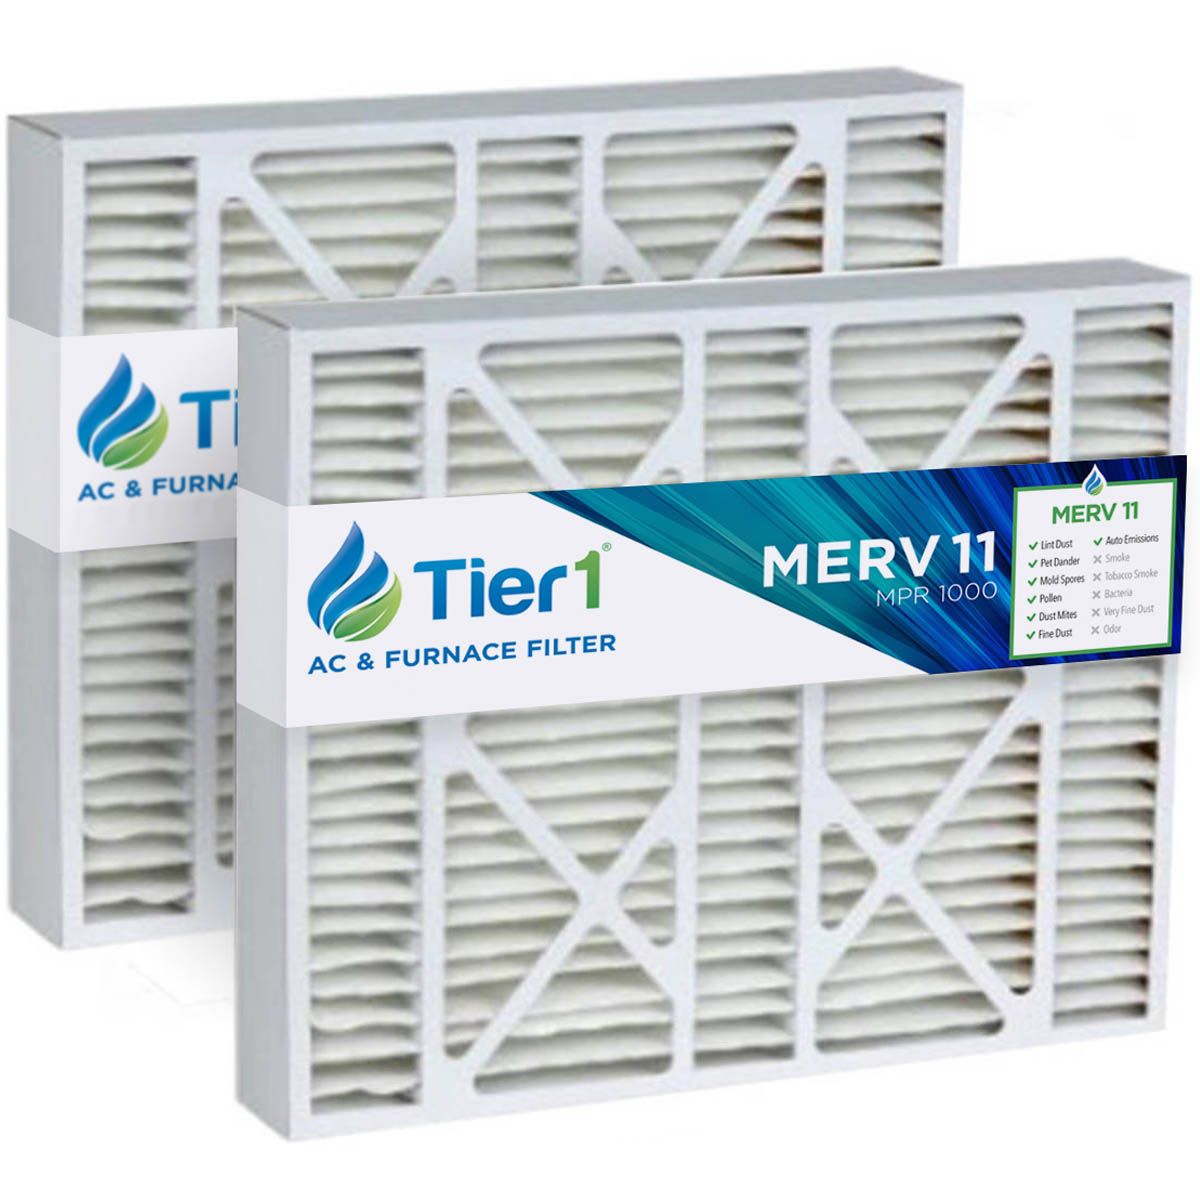 Tier1 19x20x4-1/4 Merv 11 Pleated AC Furnace Air Filter 2 Pack (Actual Size: 19 1/8 x19 13/16 x 4 1/2)